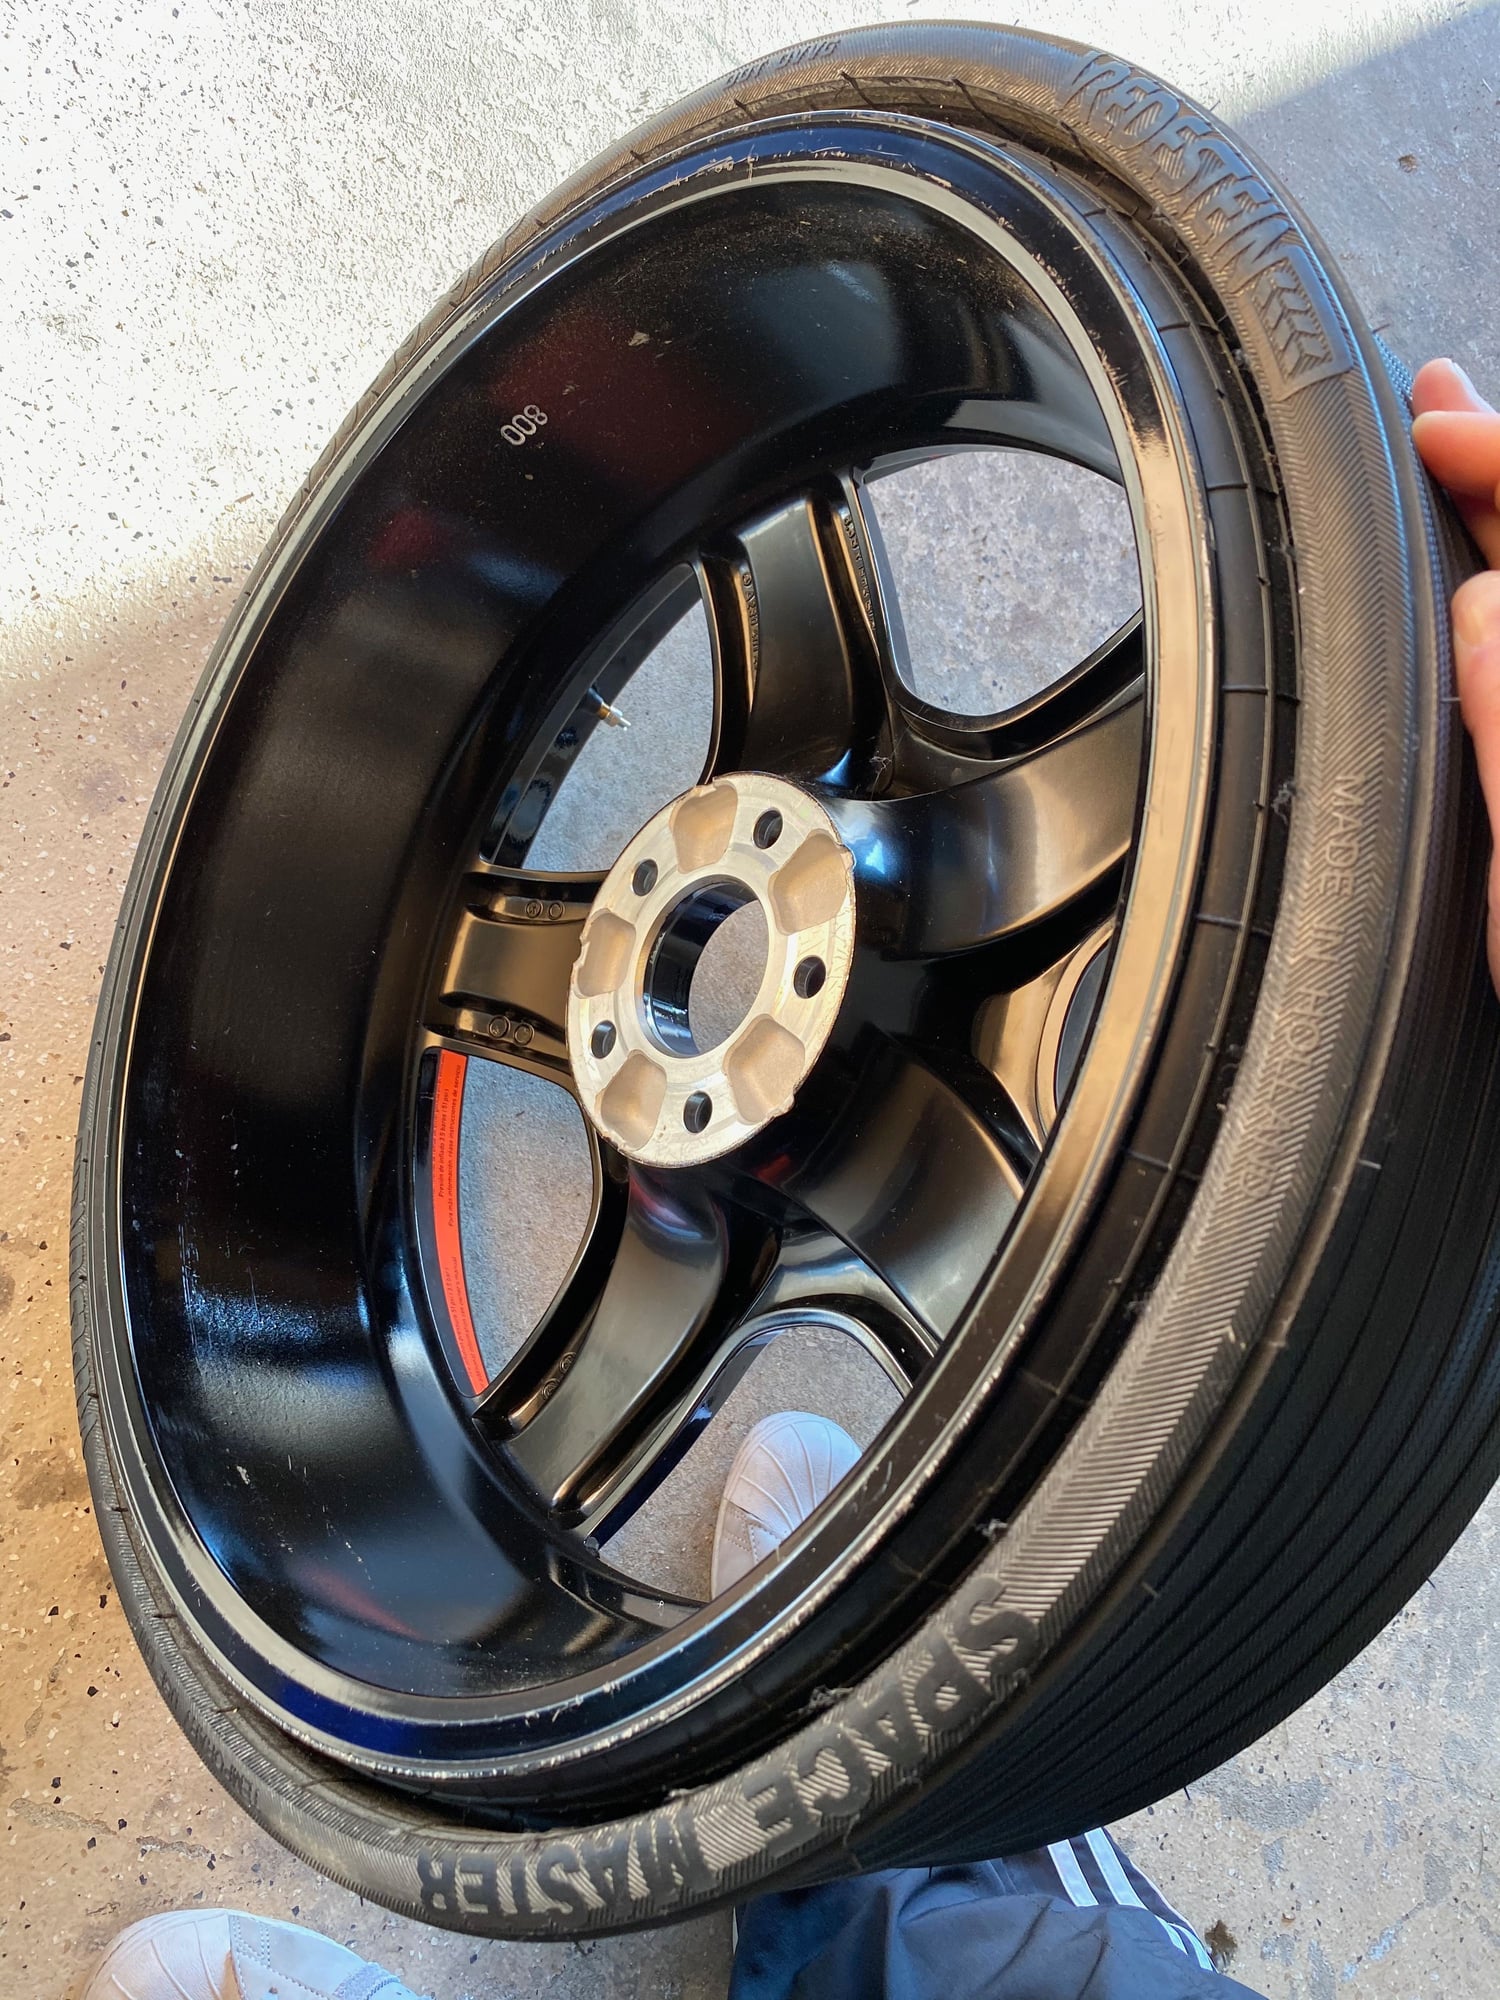 Wheels and Tires/Axles - 196.5 Inch Compact Emergency Spare Wheel Rim Tire 2304012702 2124004200 OEM Mercedes - Used - All Years Mercedes-Benz All Models - Zionsville, IN 46077, United States